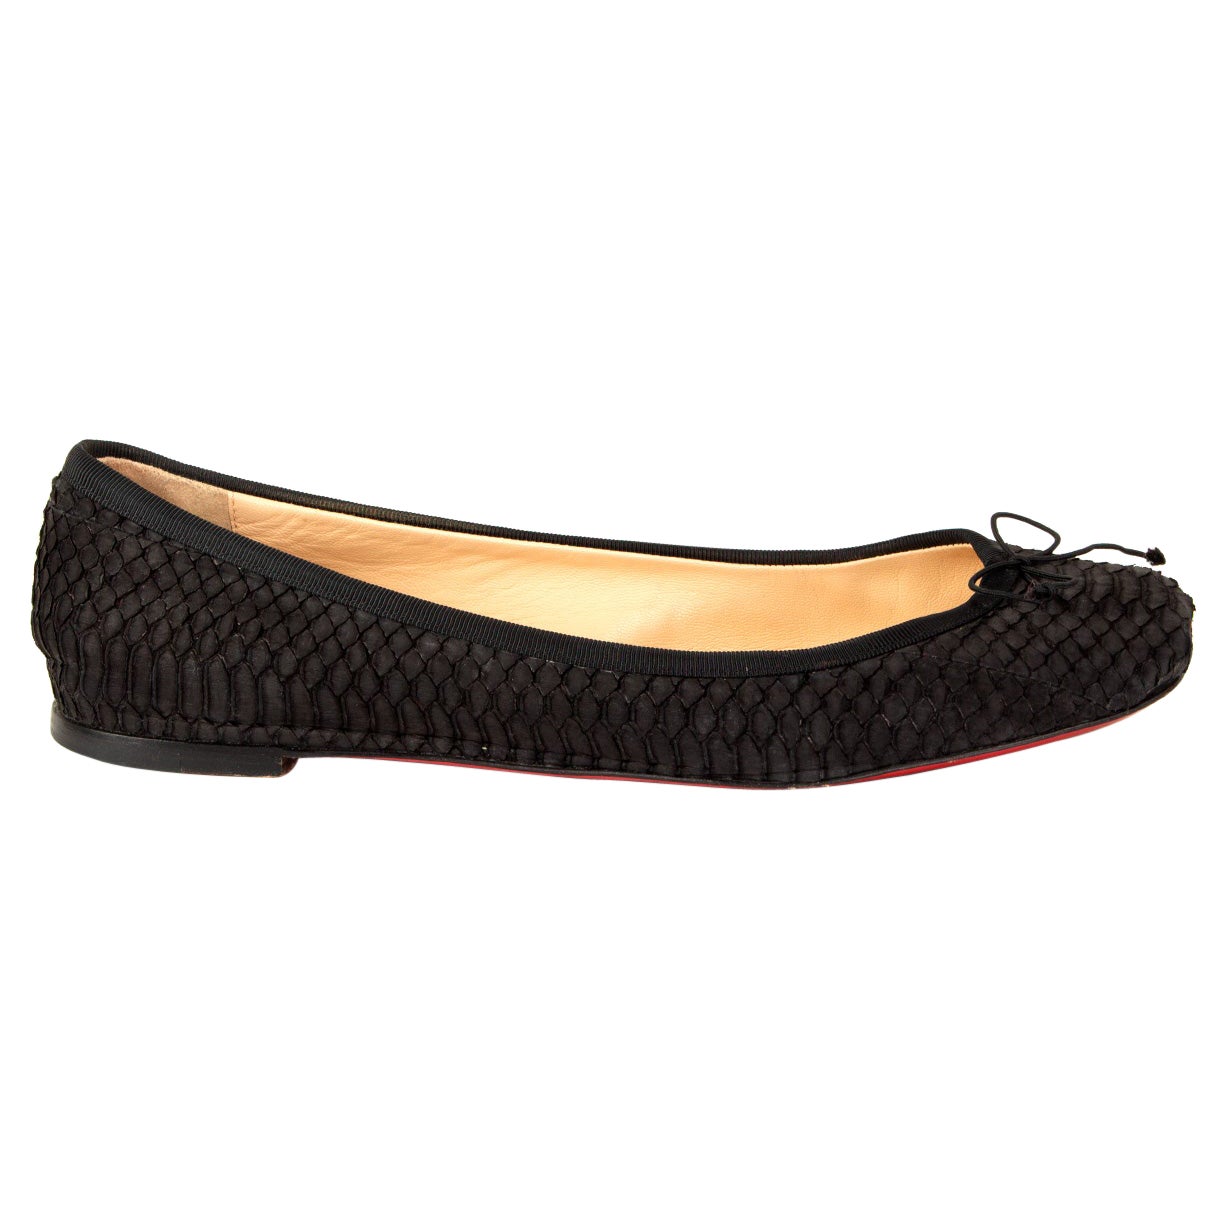 CHRISTIAN LOUBOUTIN dark brown python Rosella Ballet Flats Shoes 40 For Sale